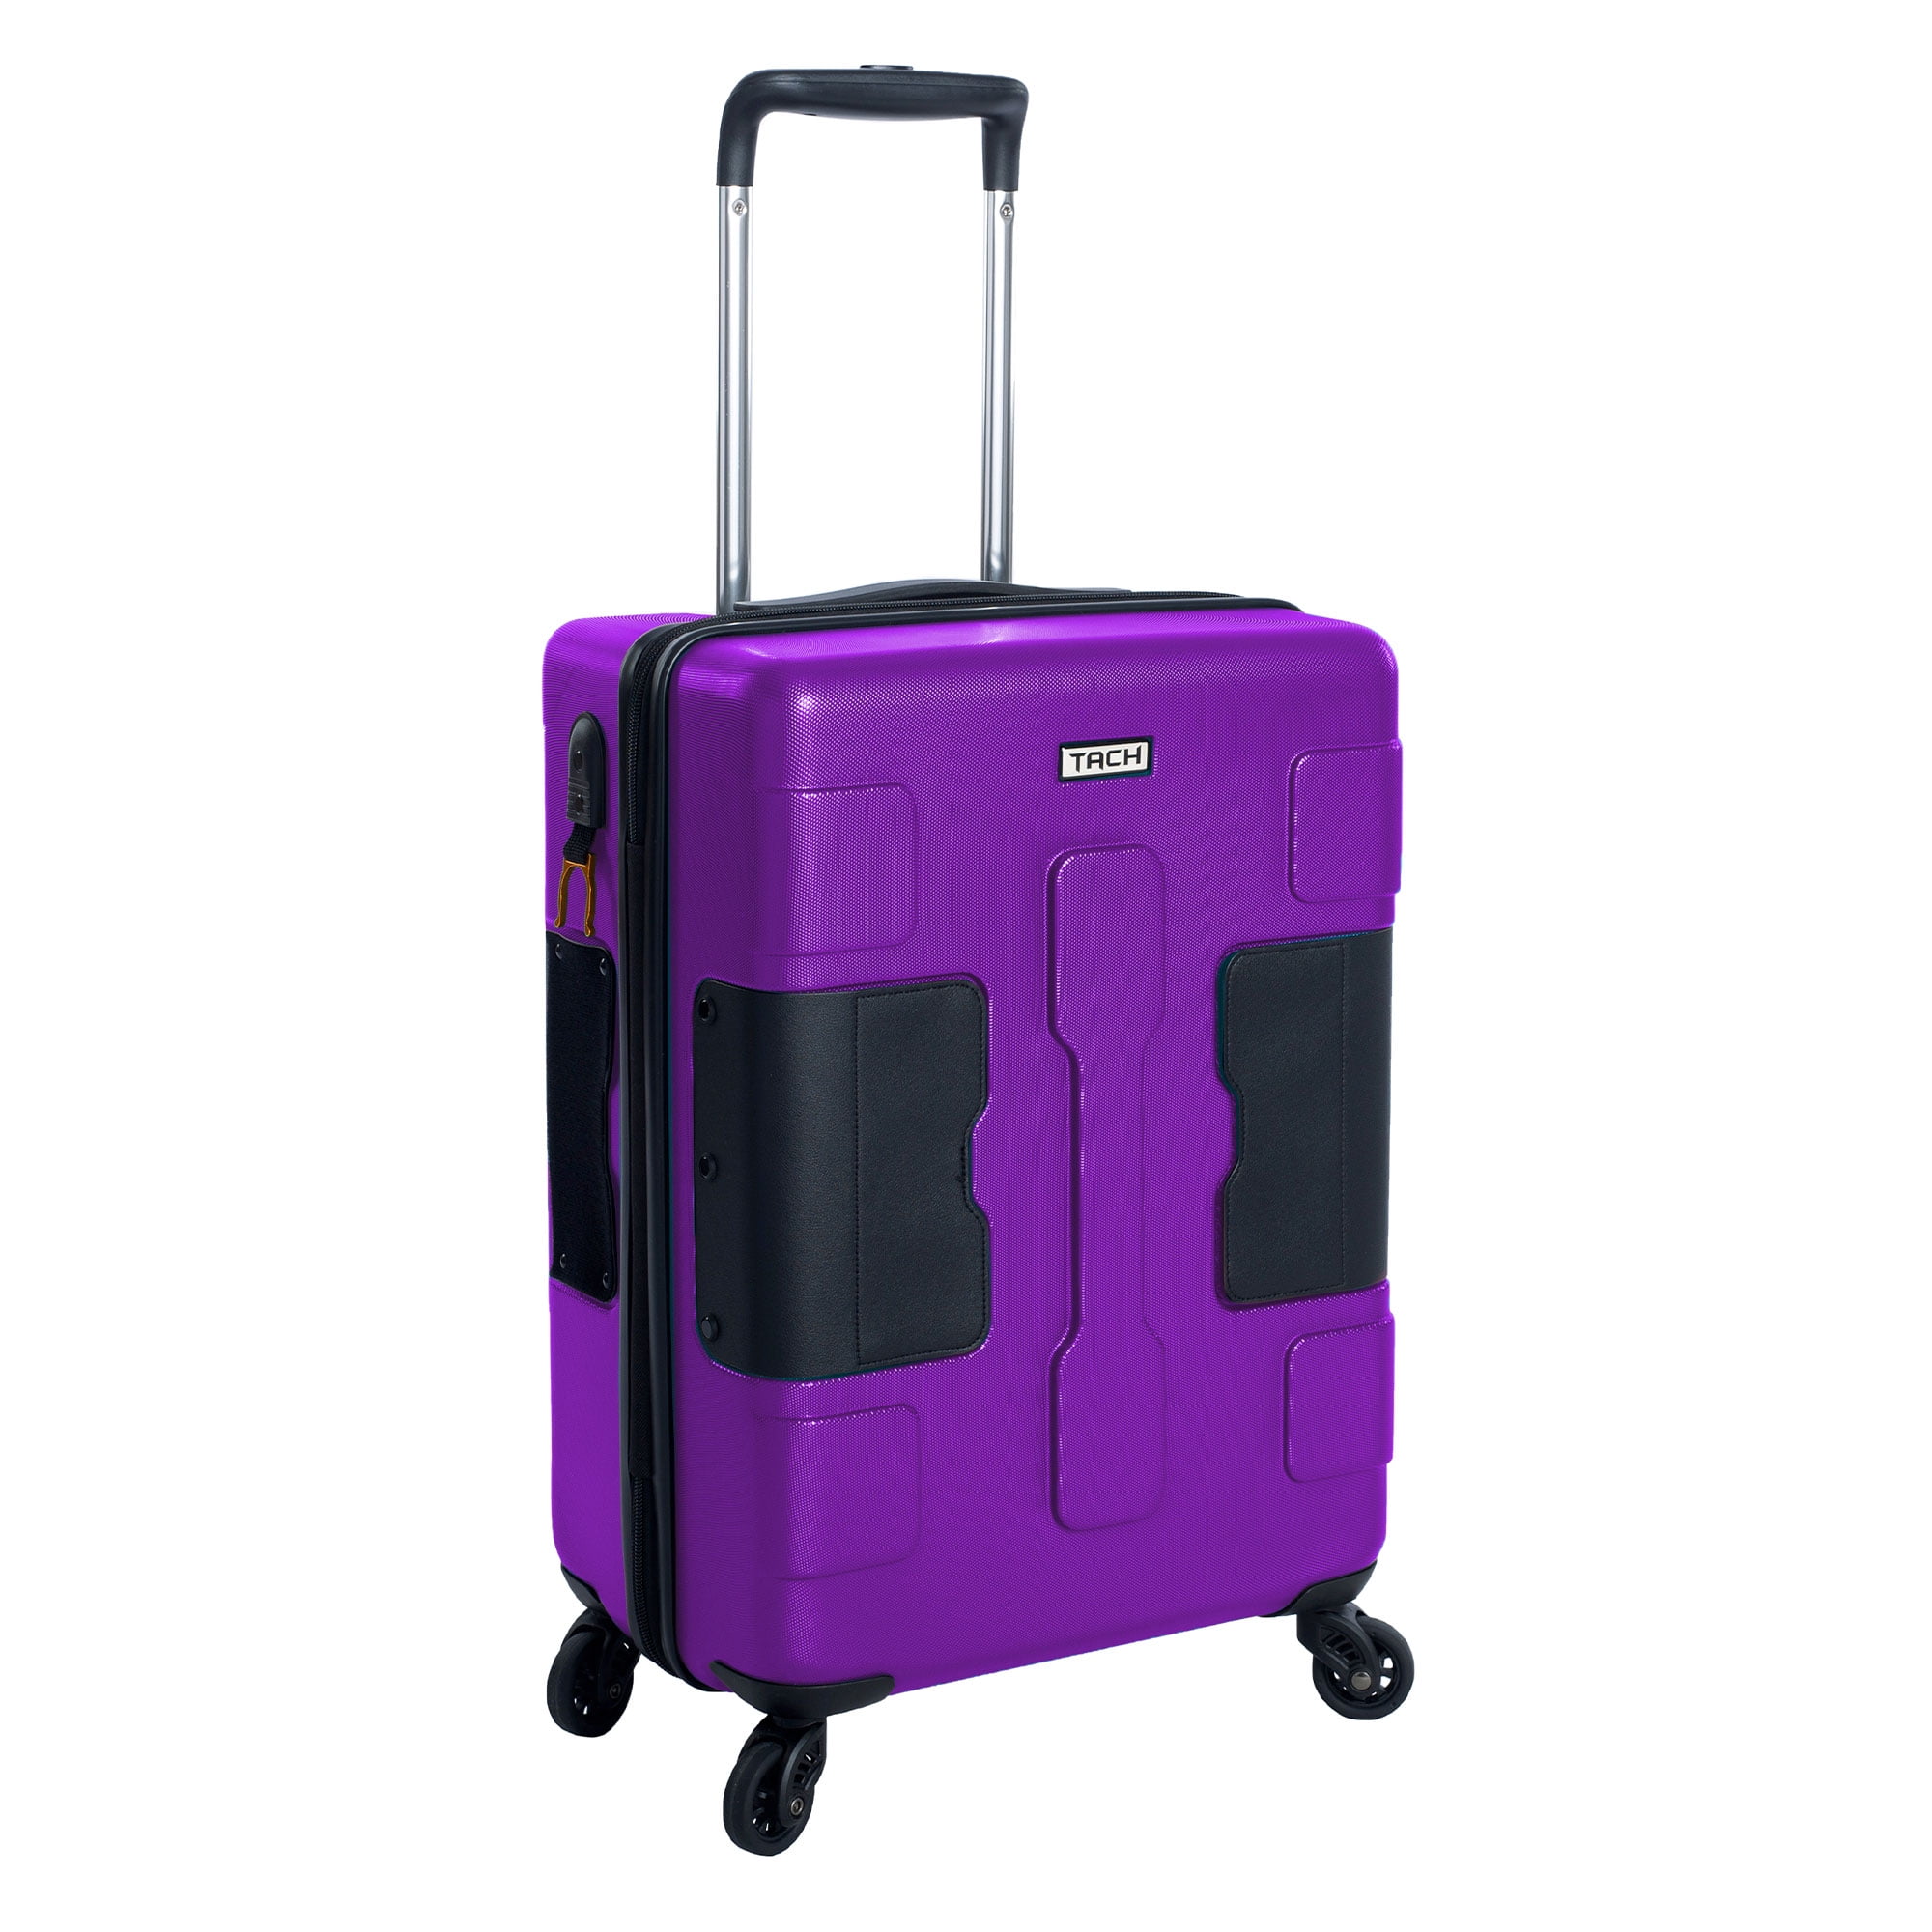 The wait is over! The Purple U.S. General 34 Full Bank Service Cart i